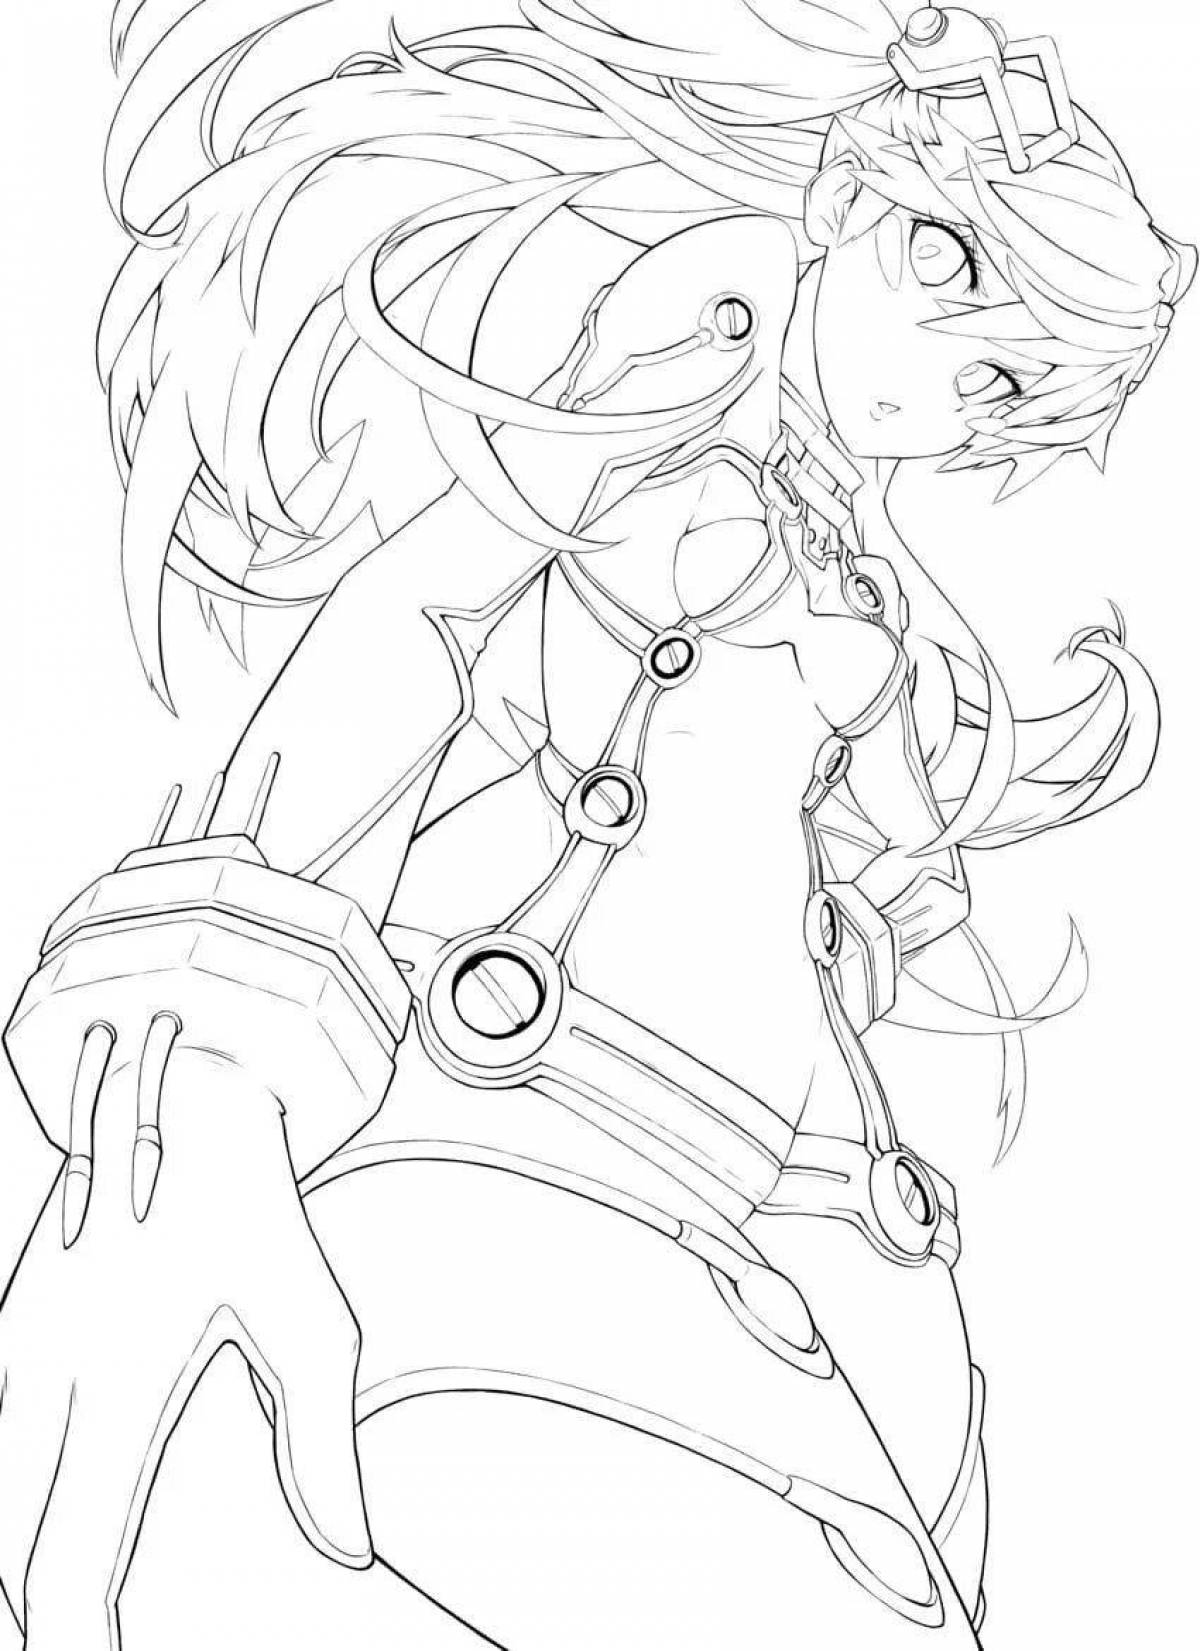 Color evangelion asuka coloring page